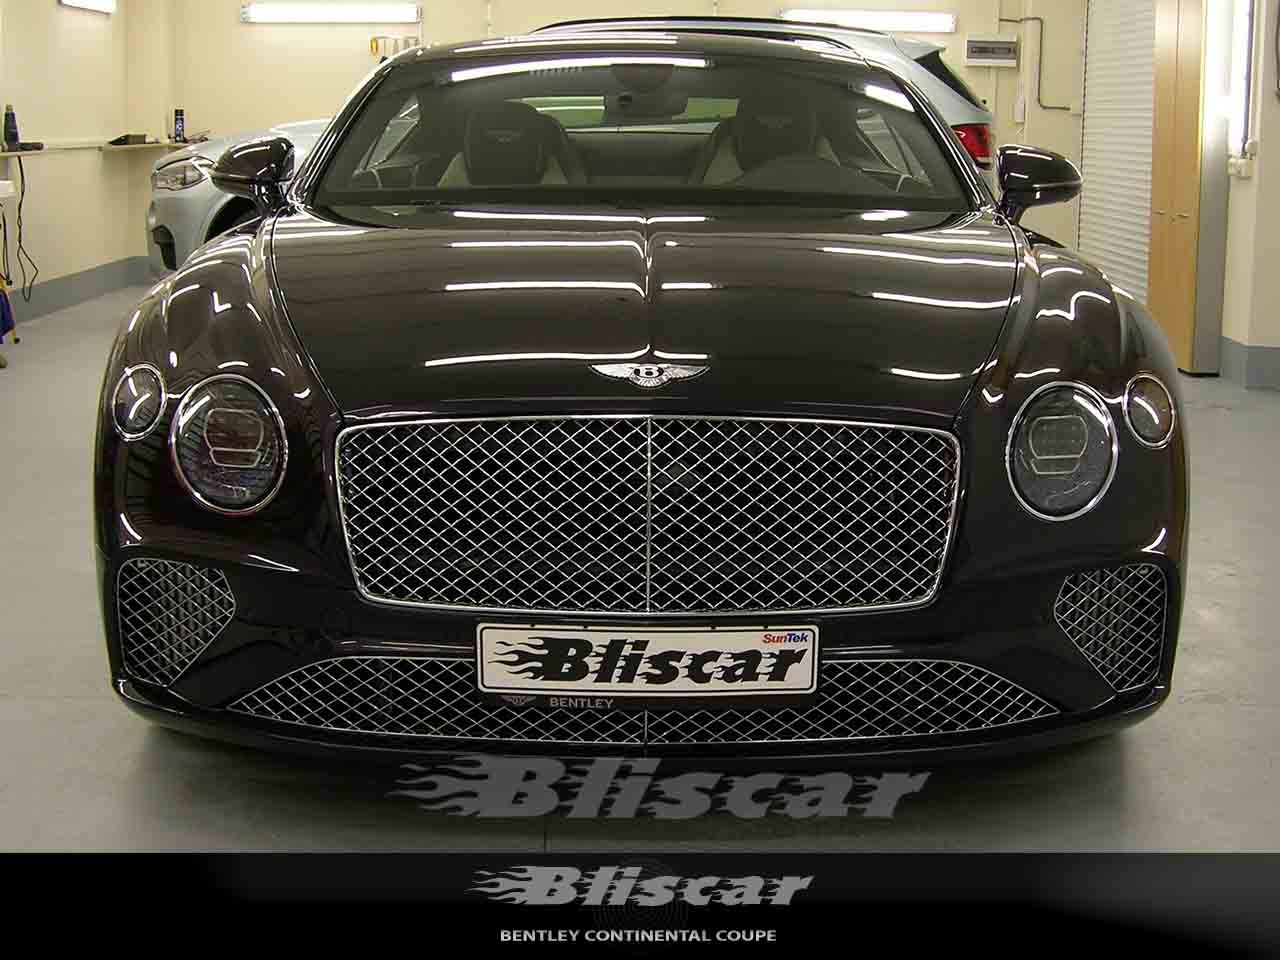 BENTLEY CONTINENTAL COUPE